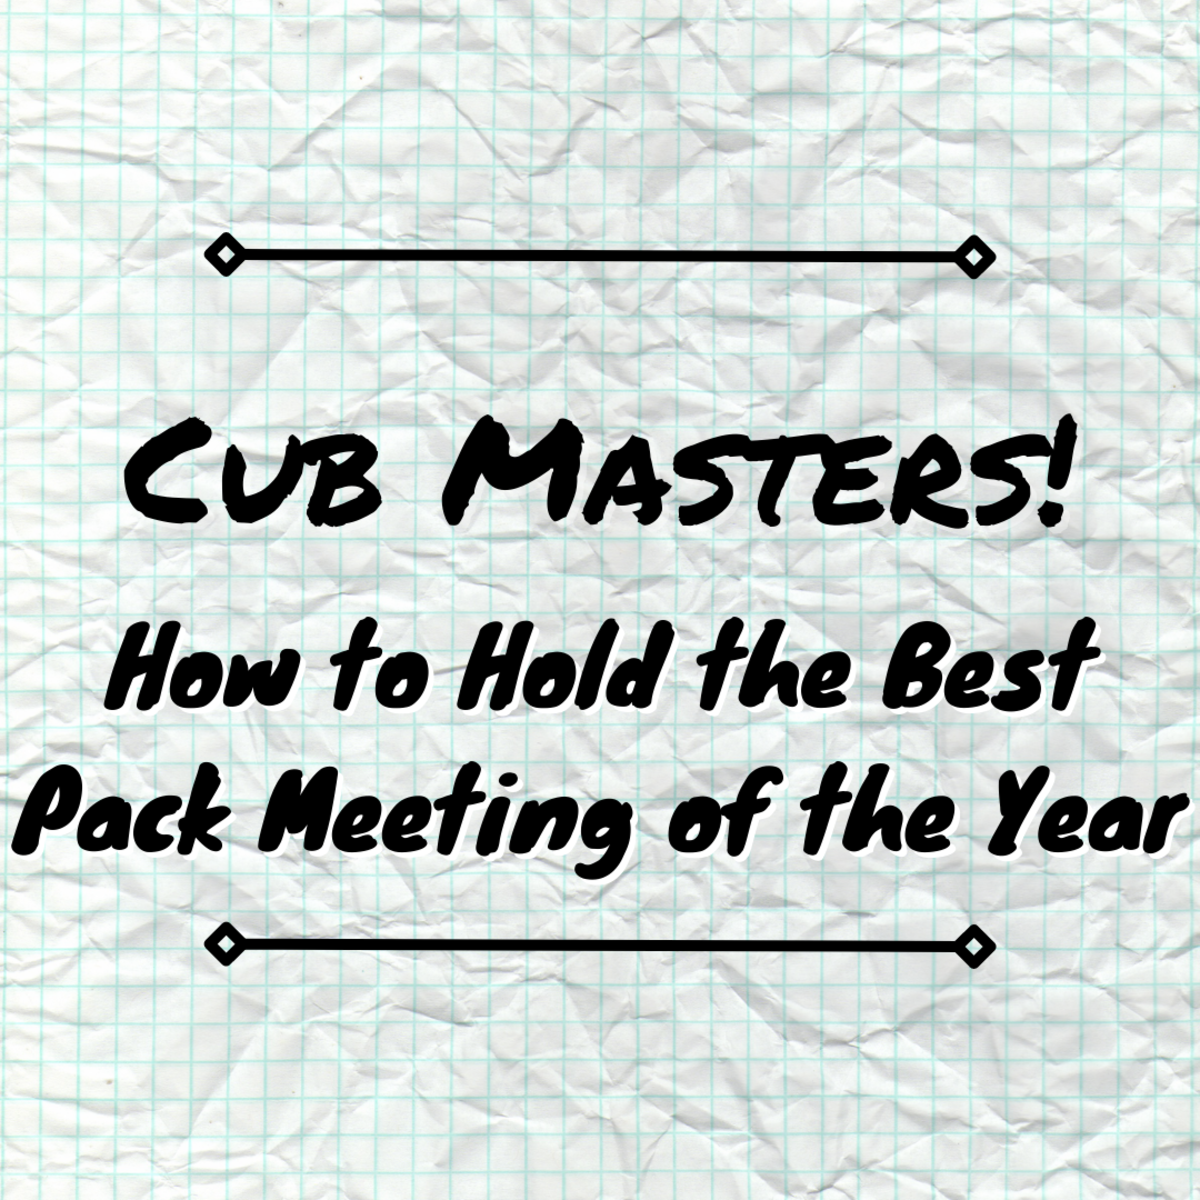 How to Hold the Best Pack Meeting of the Year